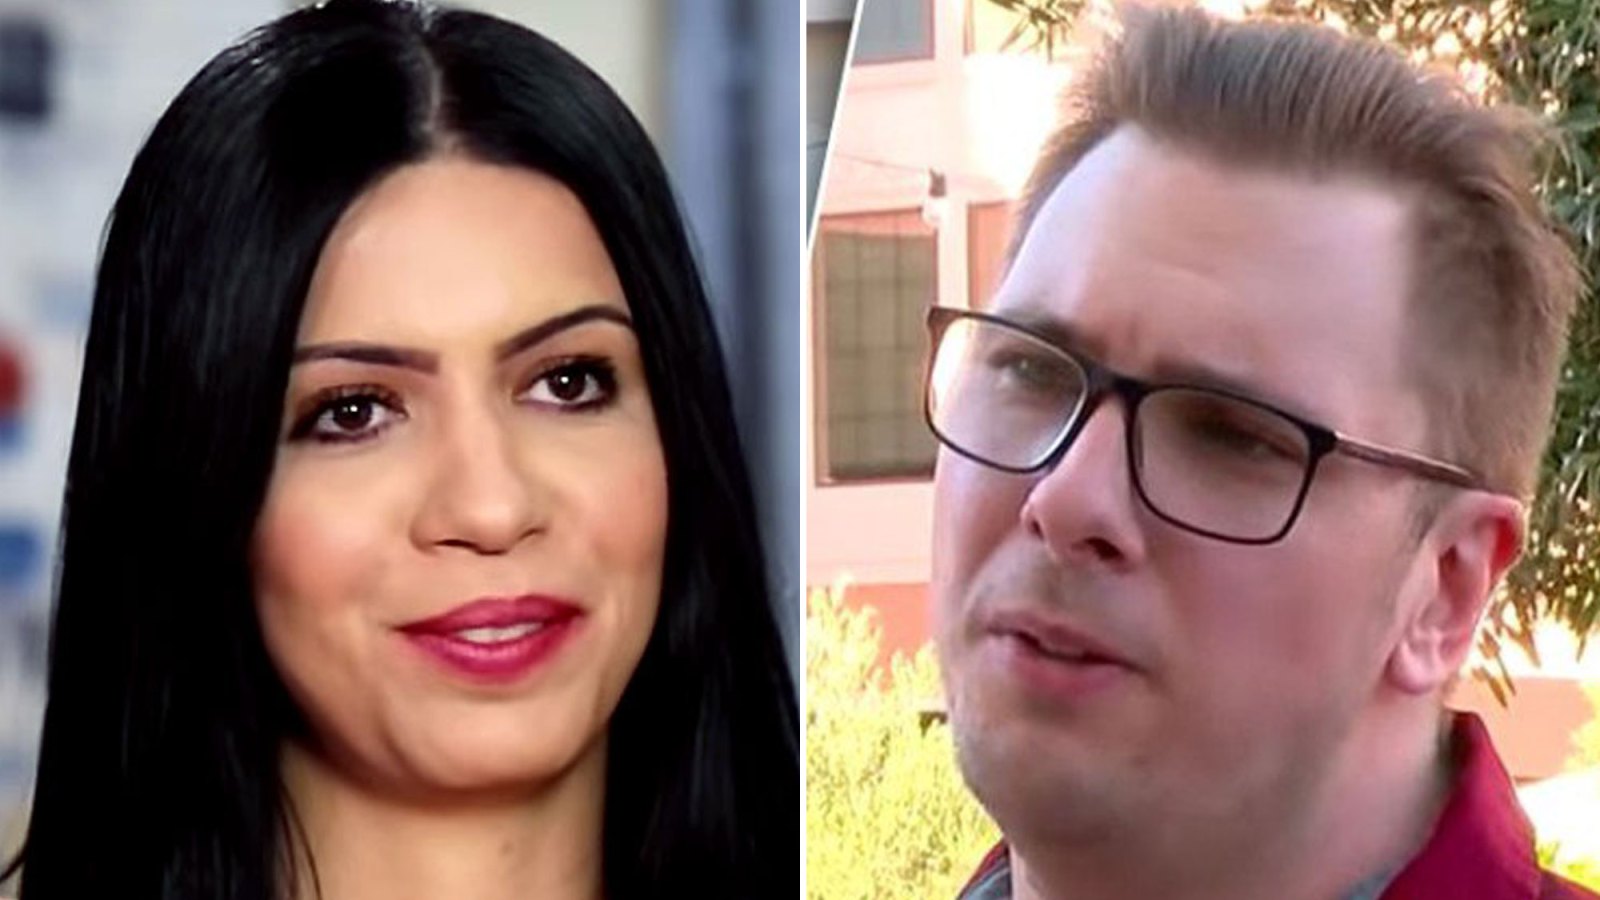 90 Day Fiance's Larissa 'Serious' With BF, Colt Celebrates Separation